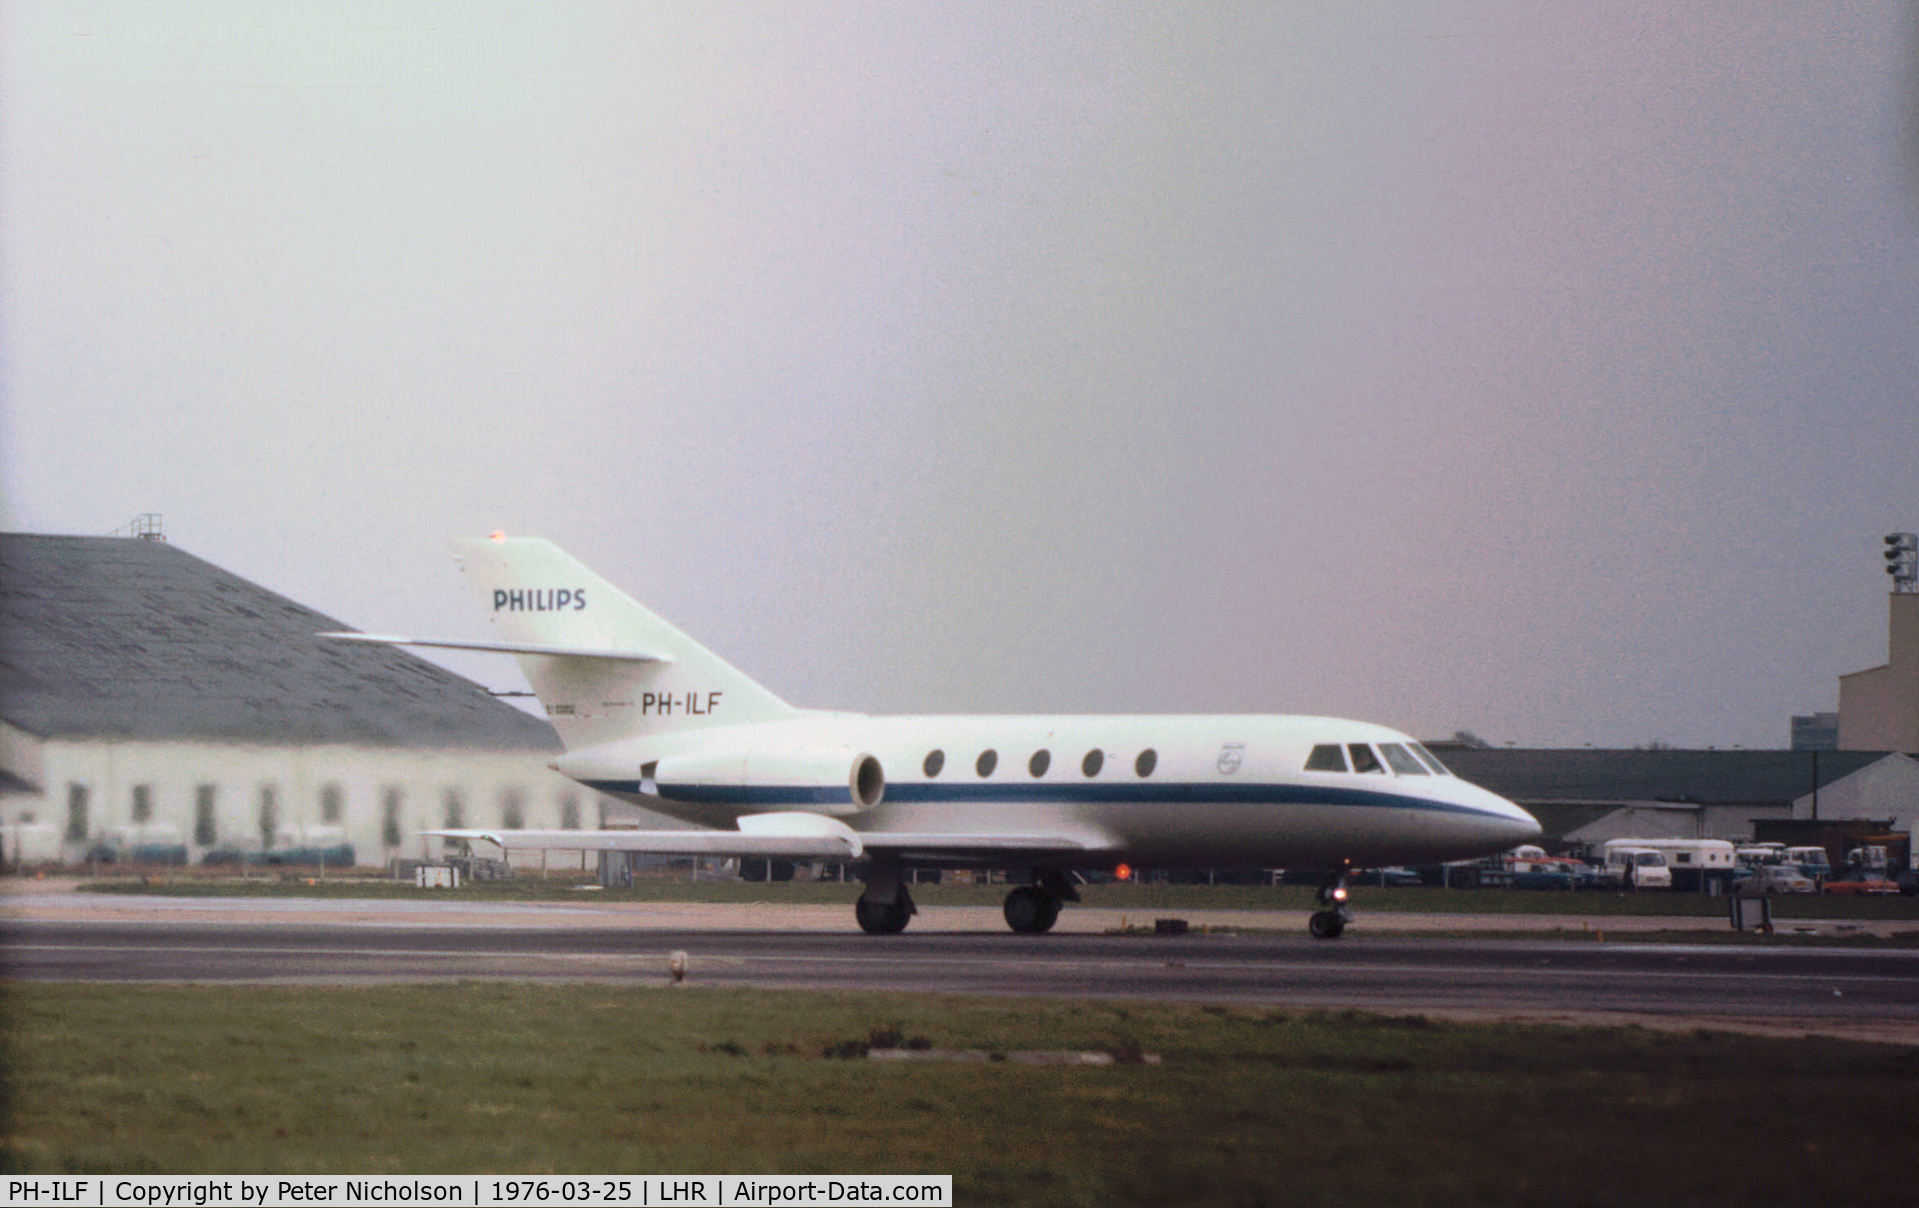 PH-ILF, 1968 Dassault Mystere 20C C/N 147, Phillips Company at Eindhoven operated this Mystere 20C seen at Heathrow in March 1976.